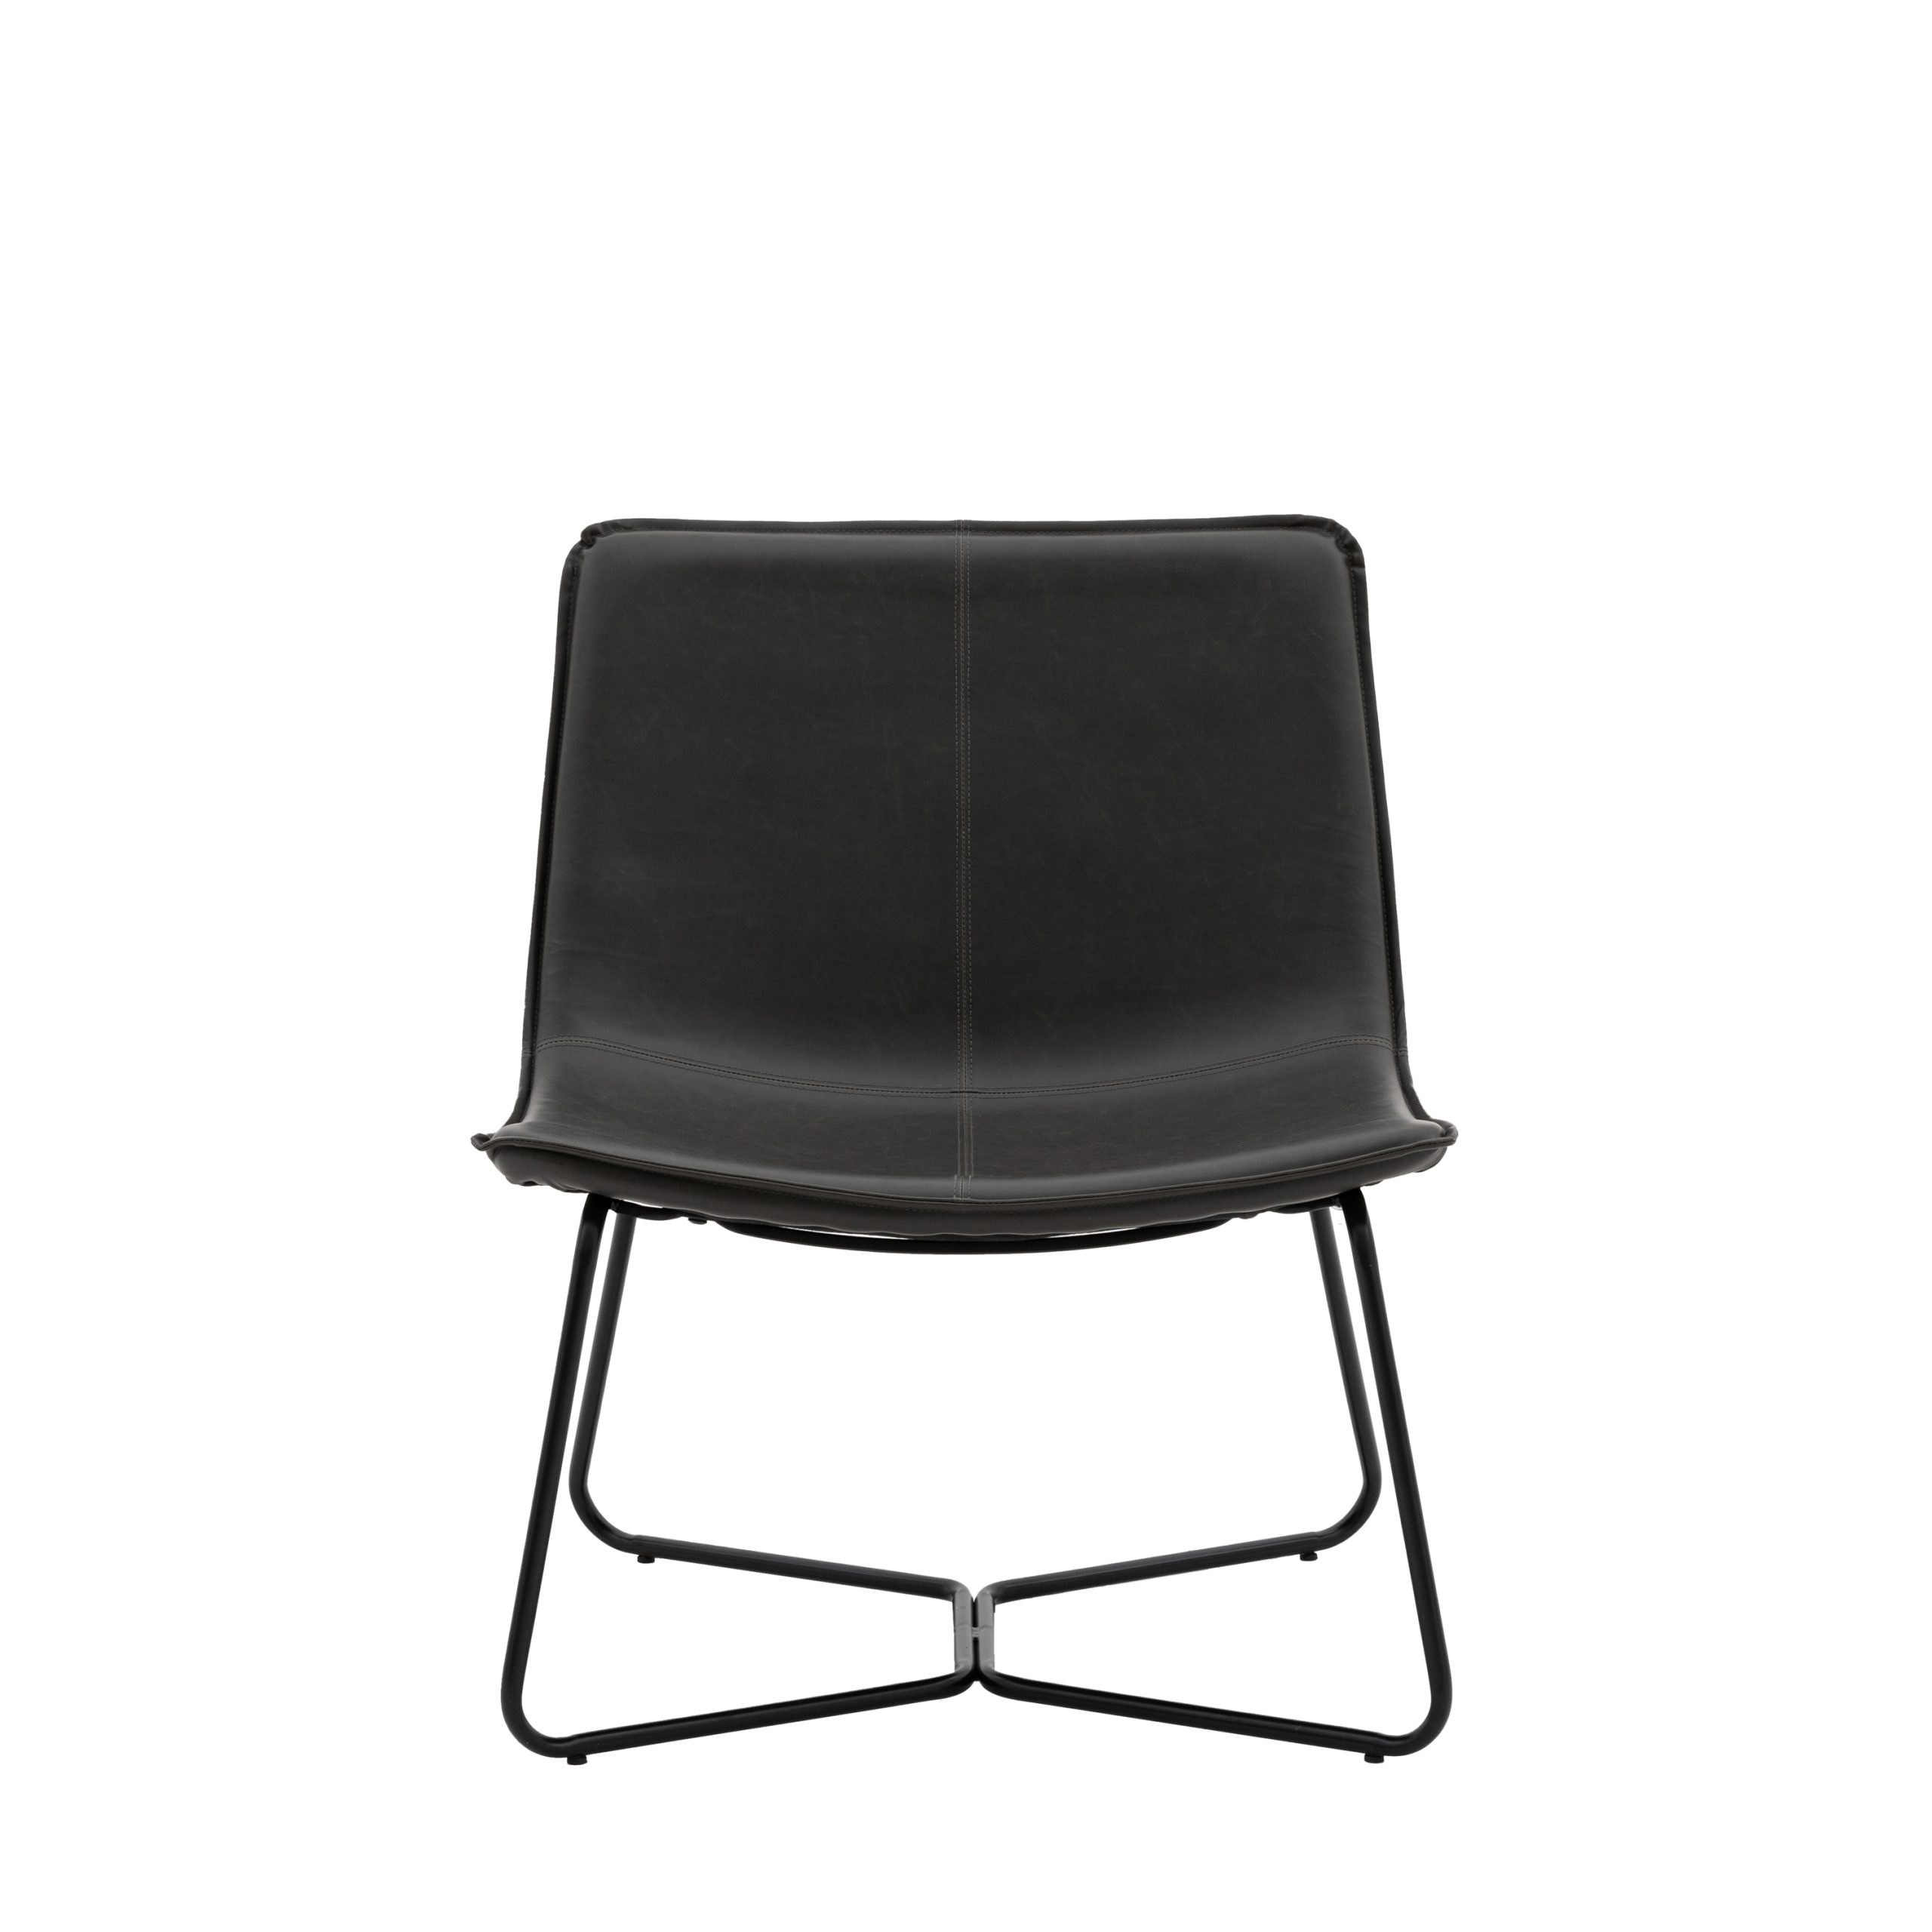 Gallery Direct Hawking Lounge Chair Charcoal